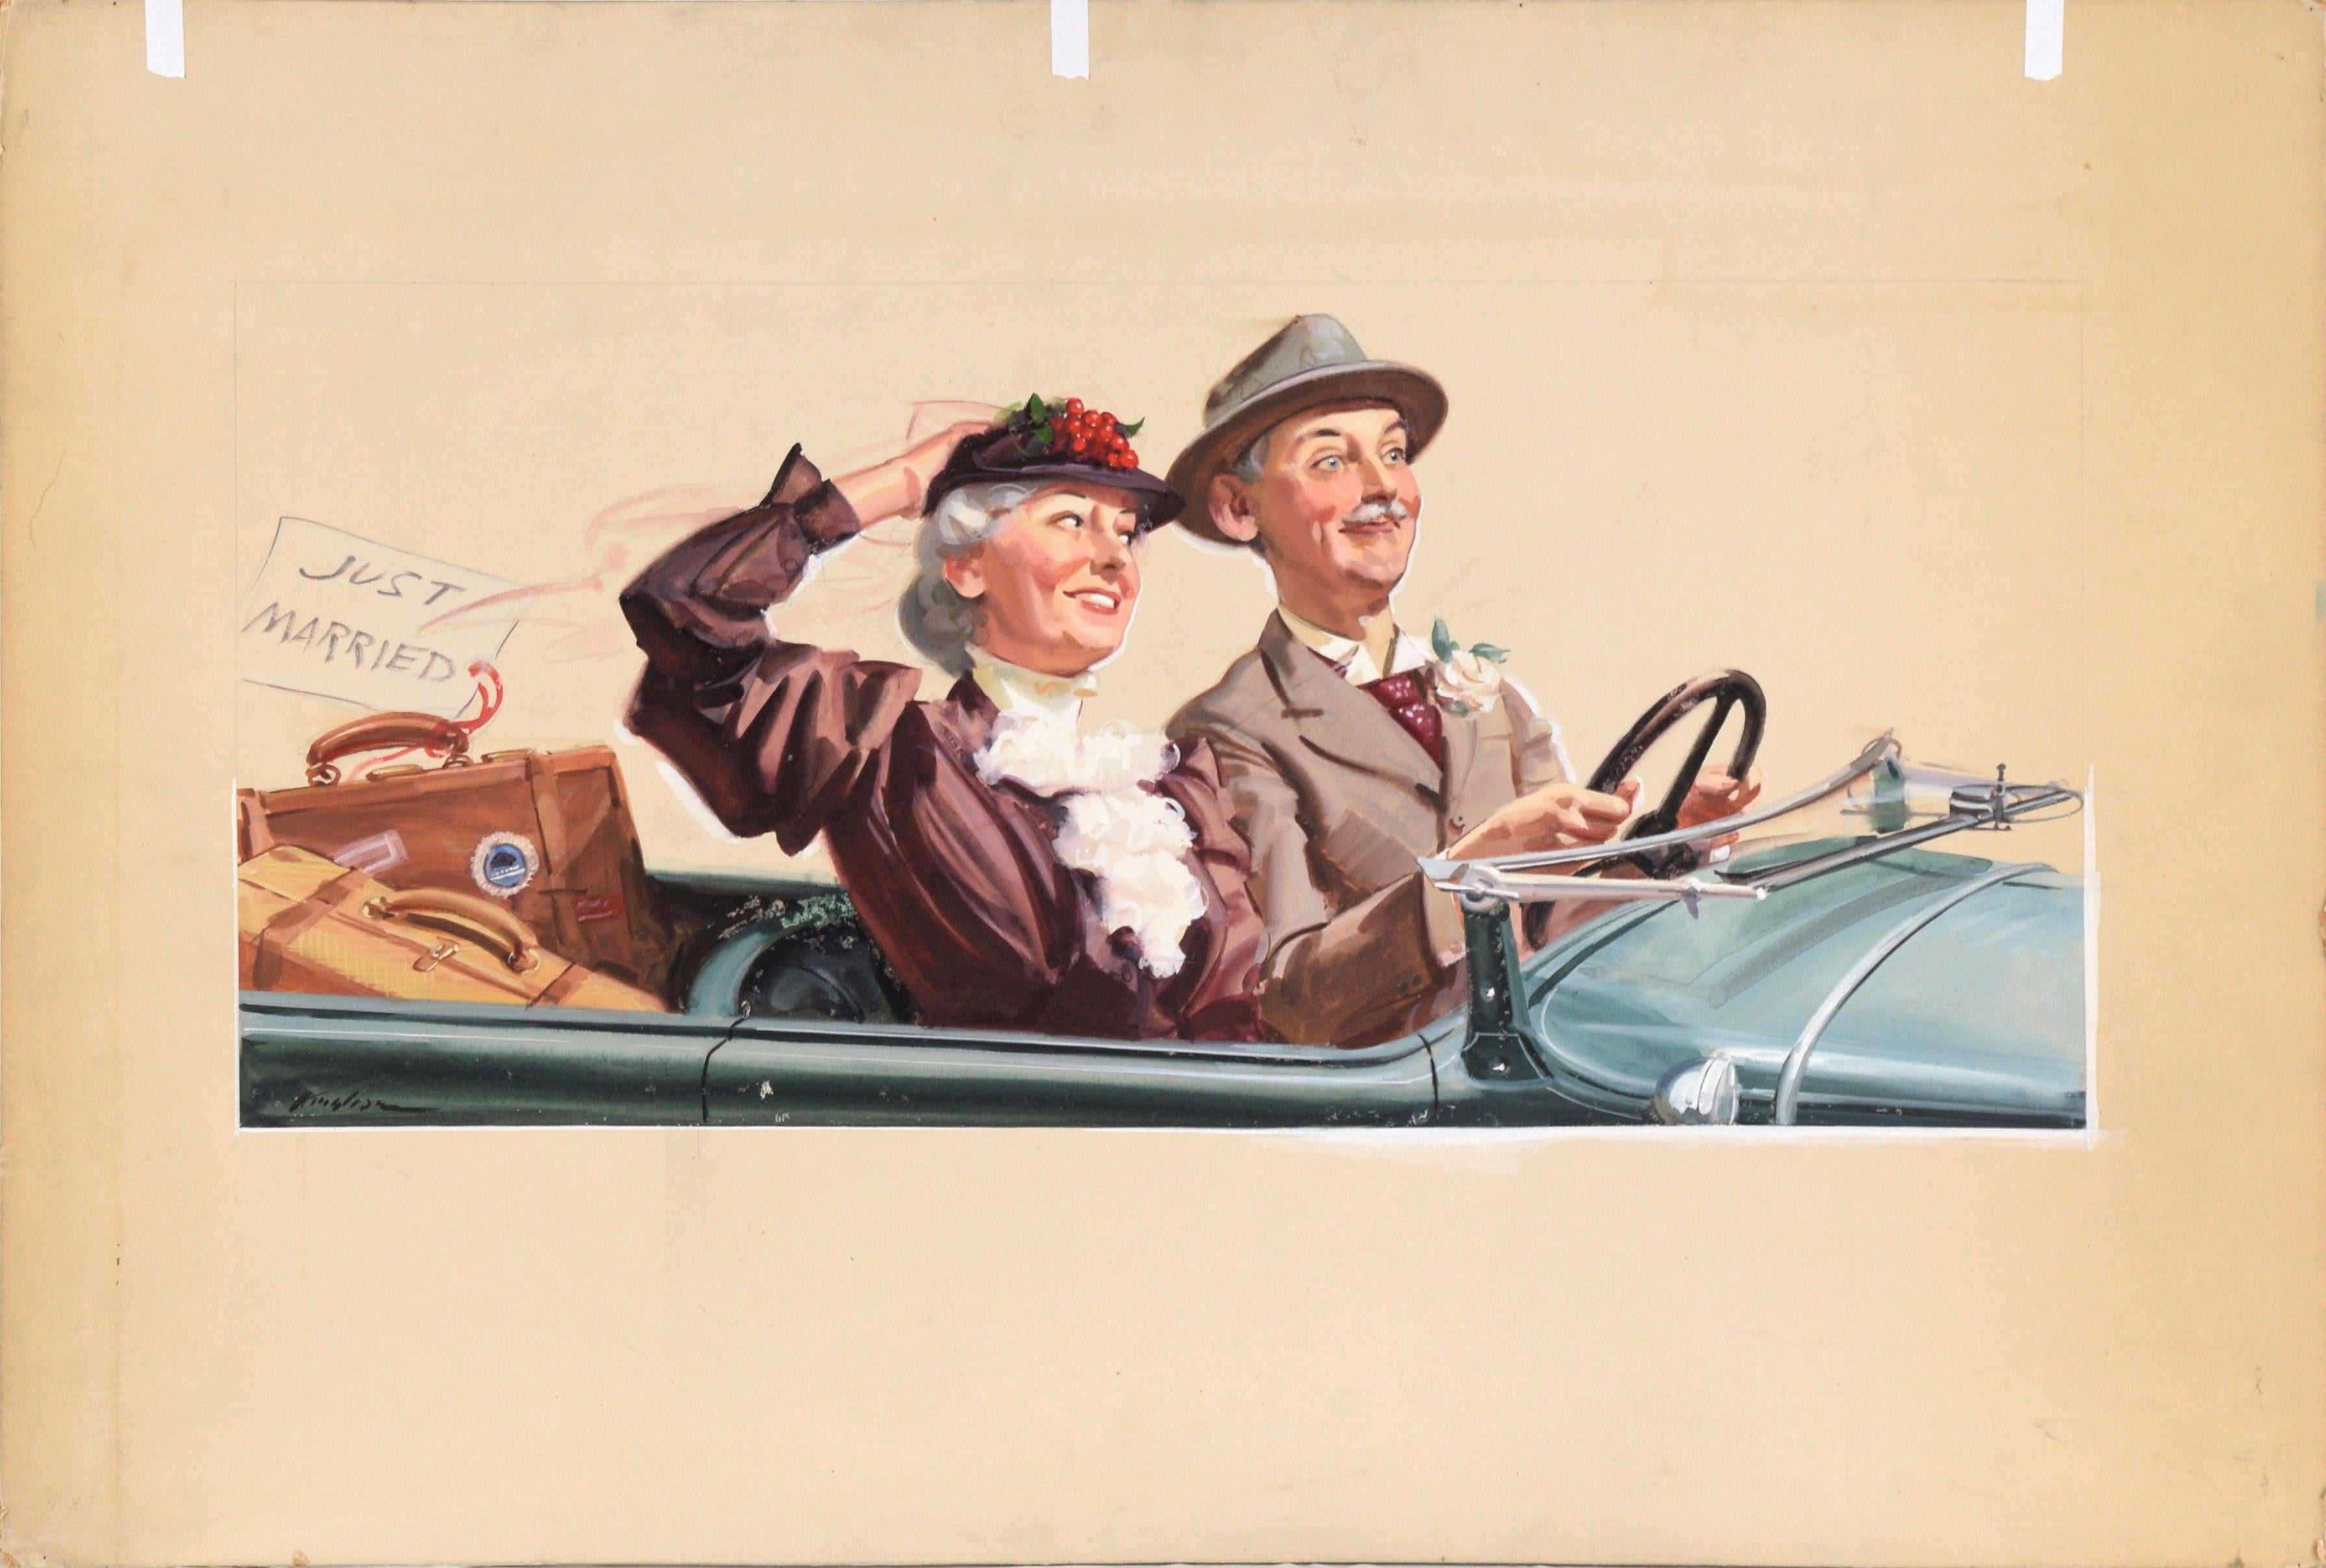 Figurative 1930's illustration of a just married couple in a classic car by Charles Kinghan (American, 1895-1984). Signed 